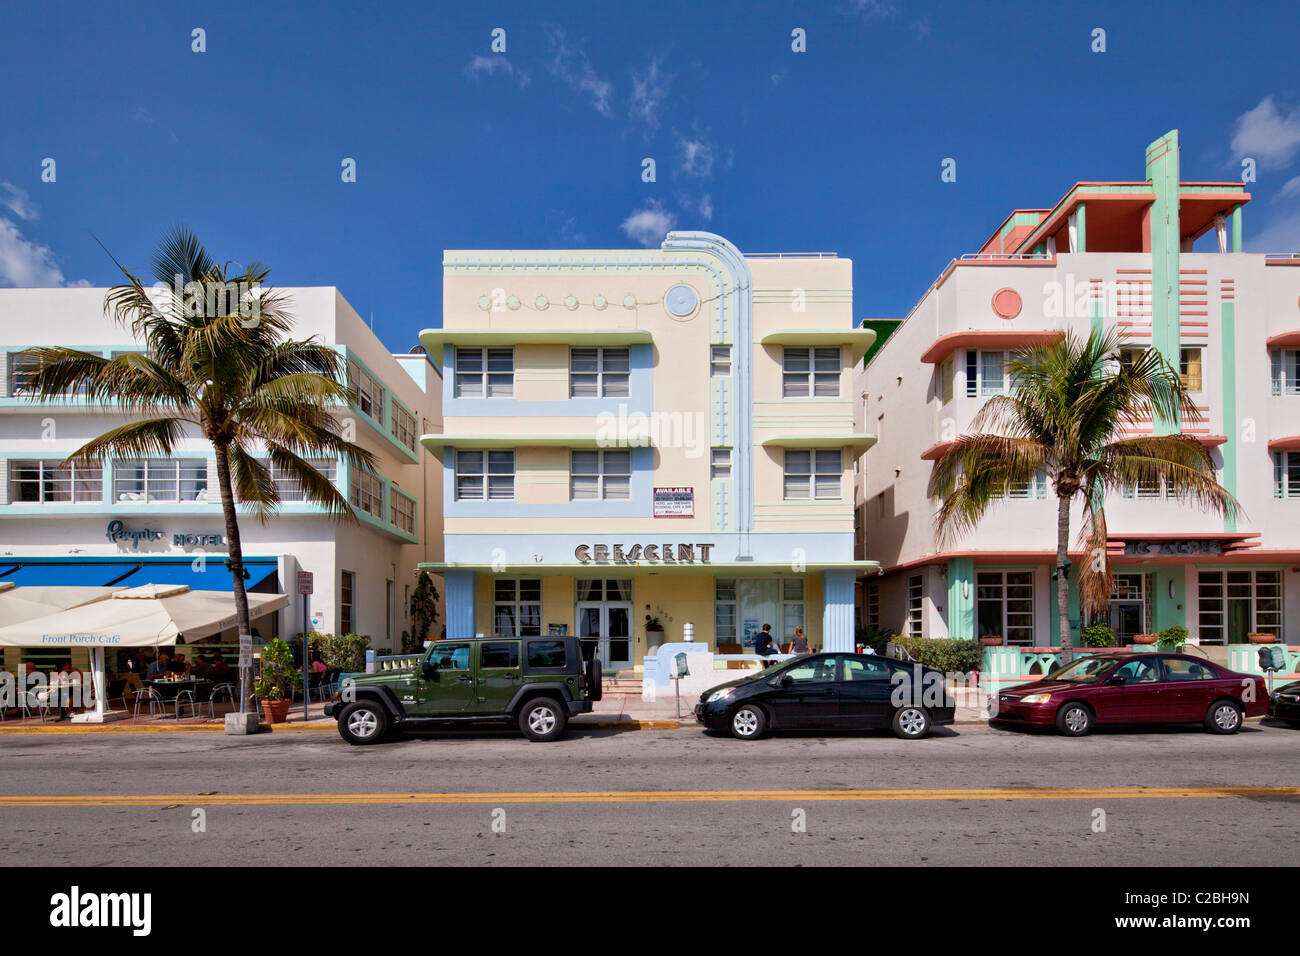 Crescent Hotel, South Beach, Miami Banque D'Images